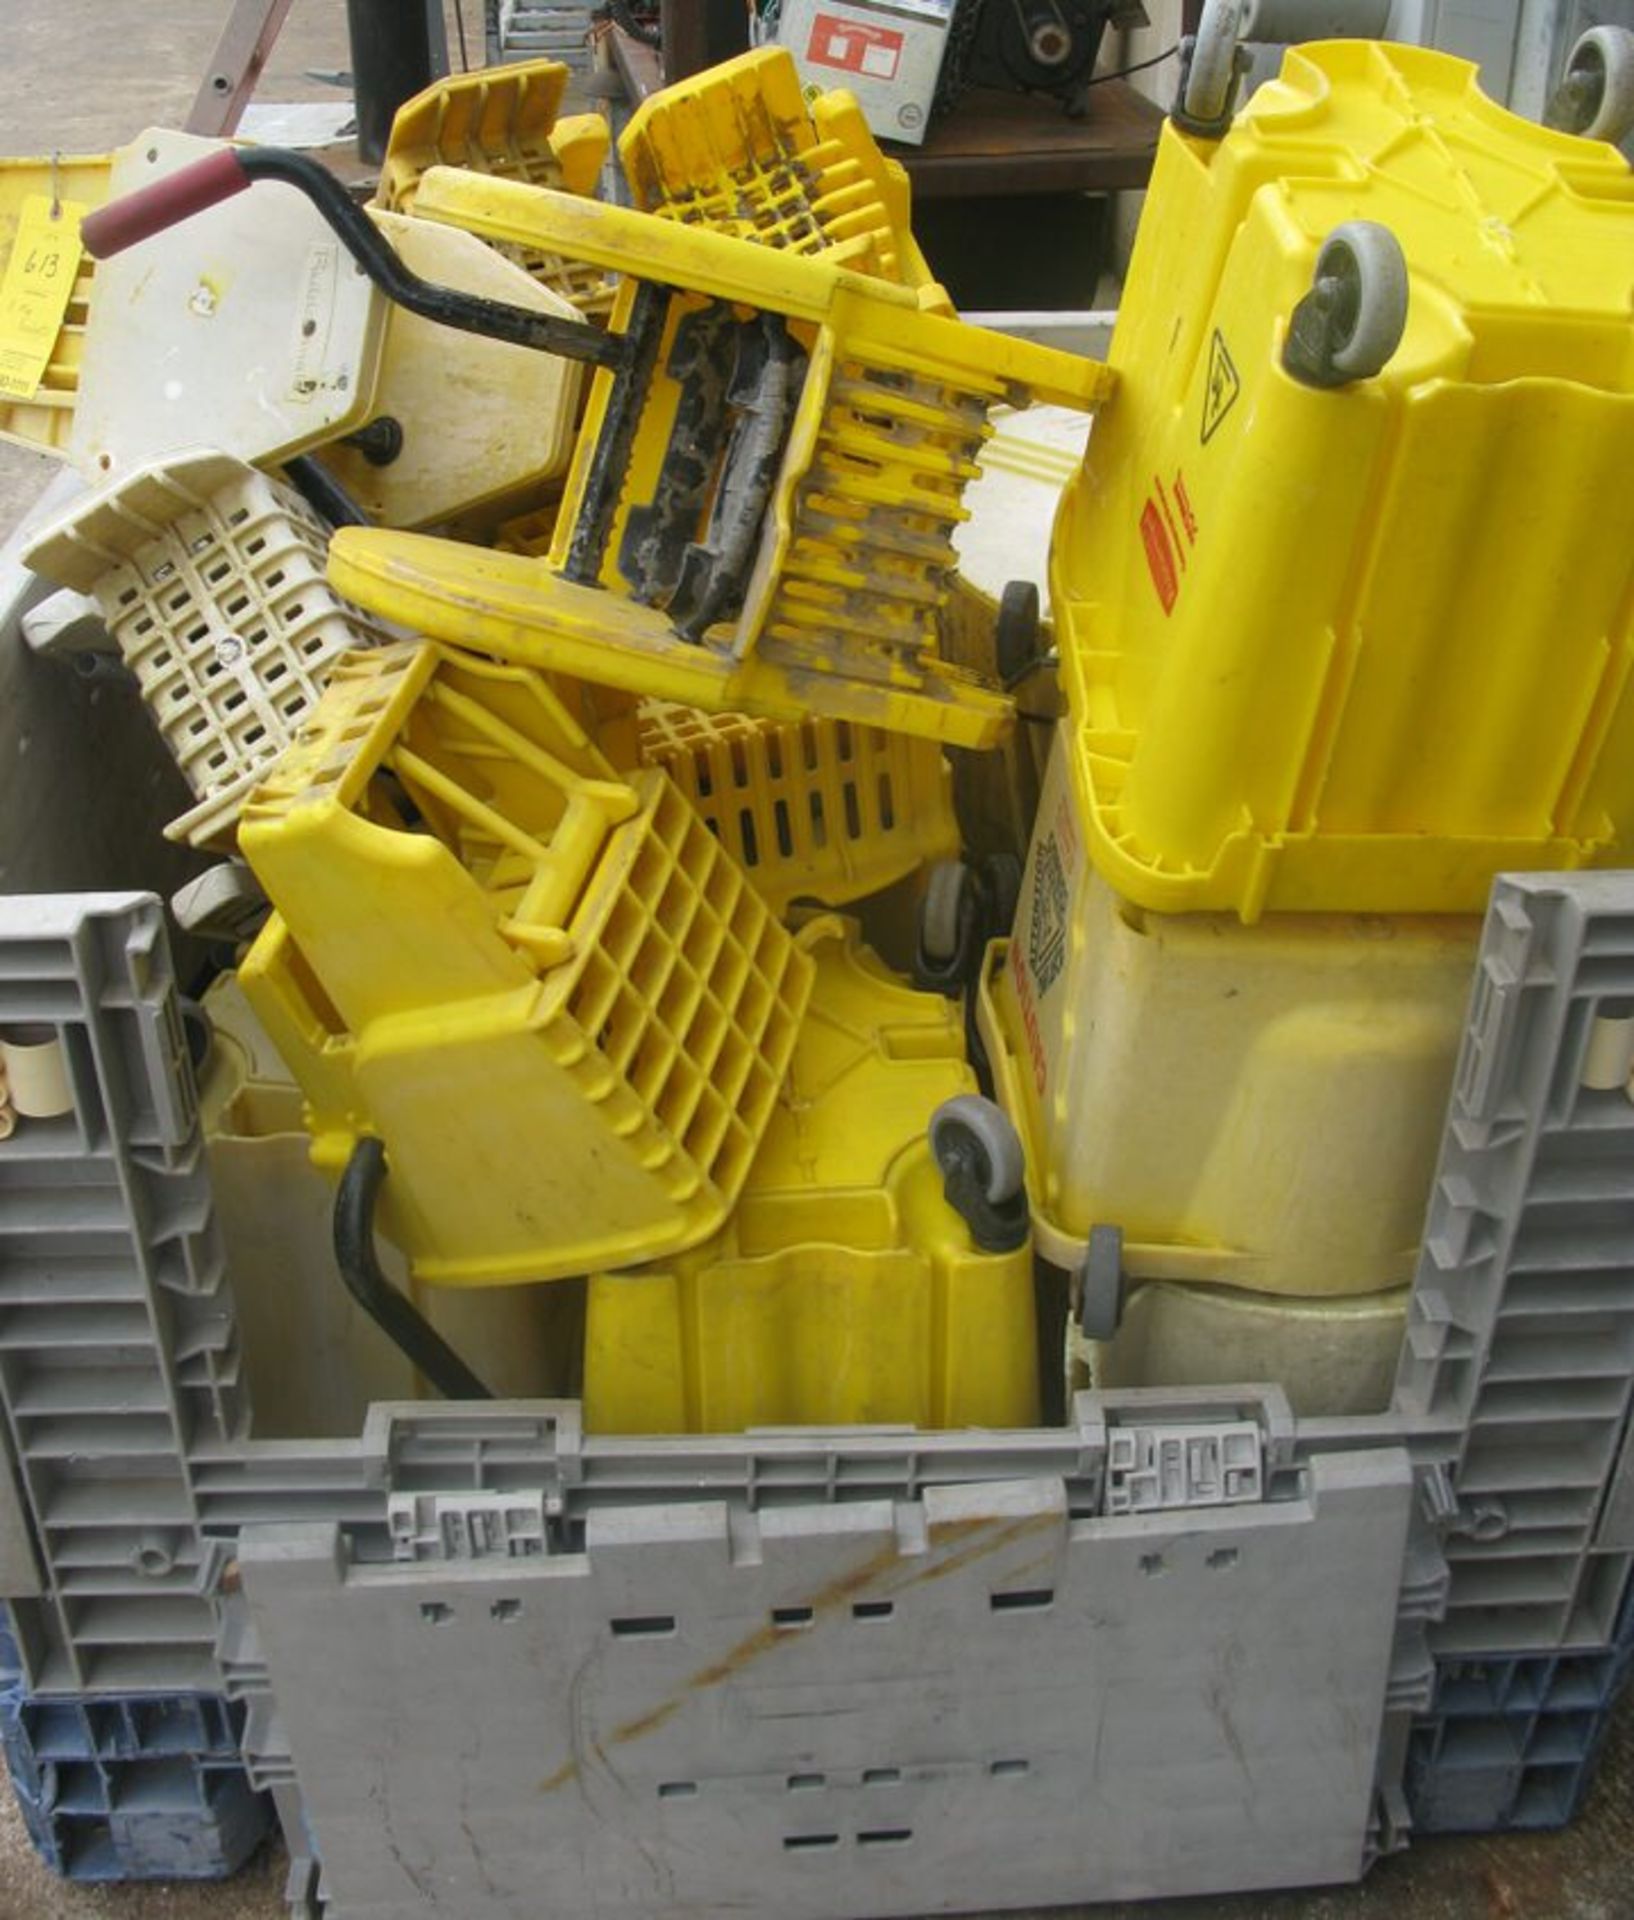 LOT of (8) Various Sizes & Types of Plastic Mop Buckets